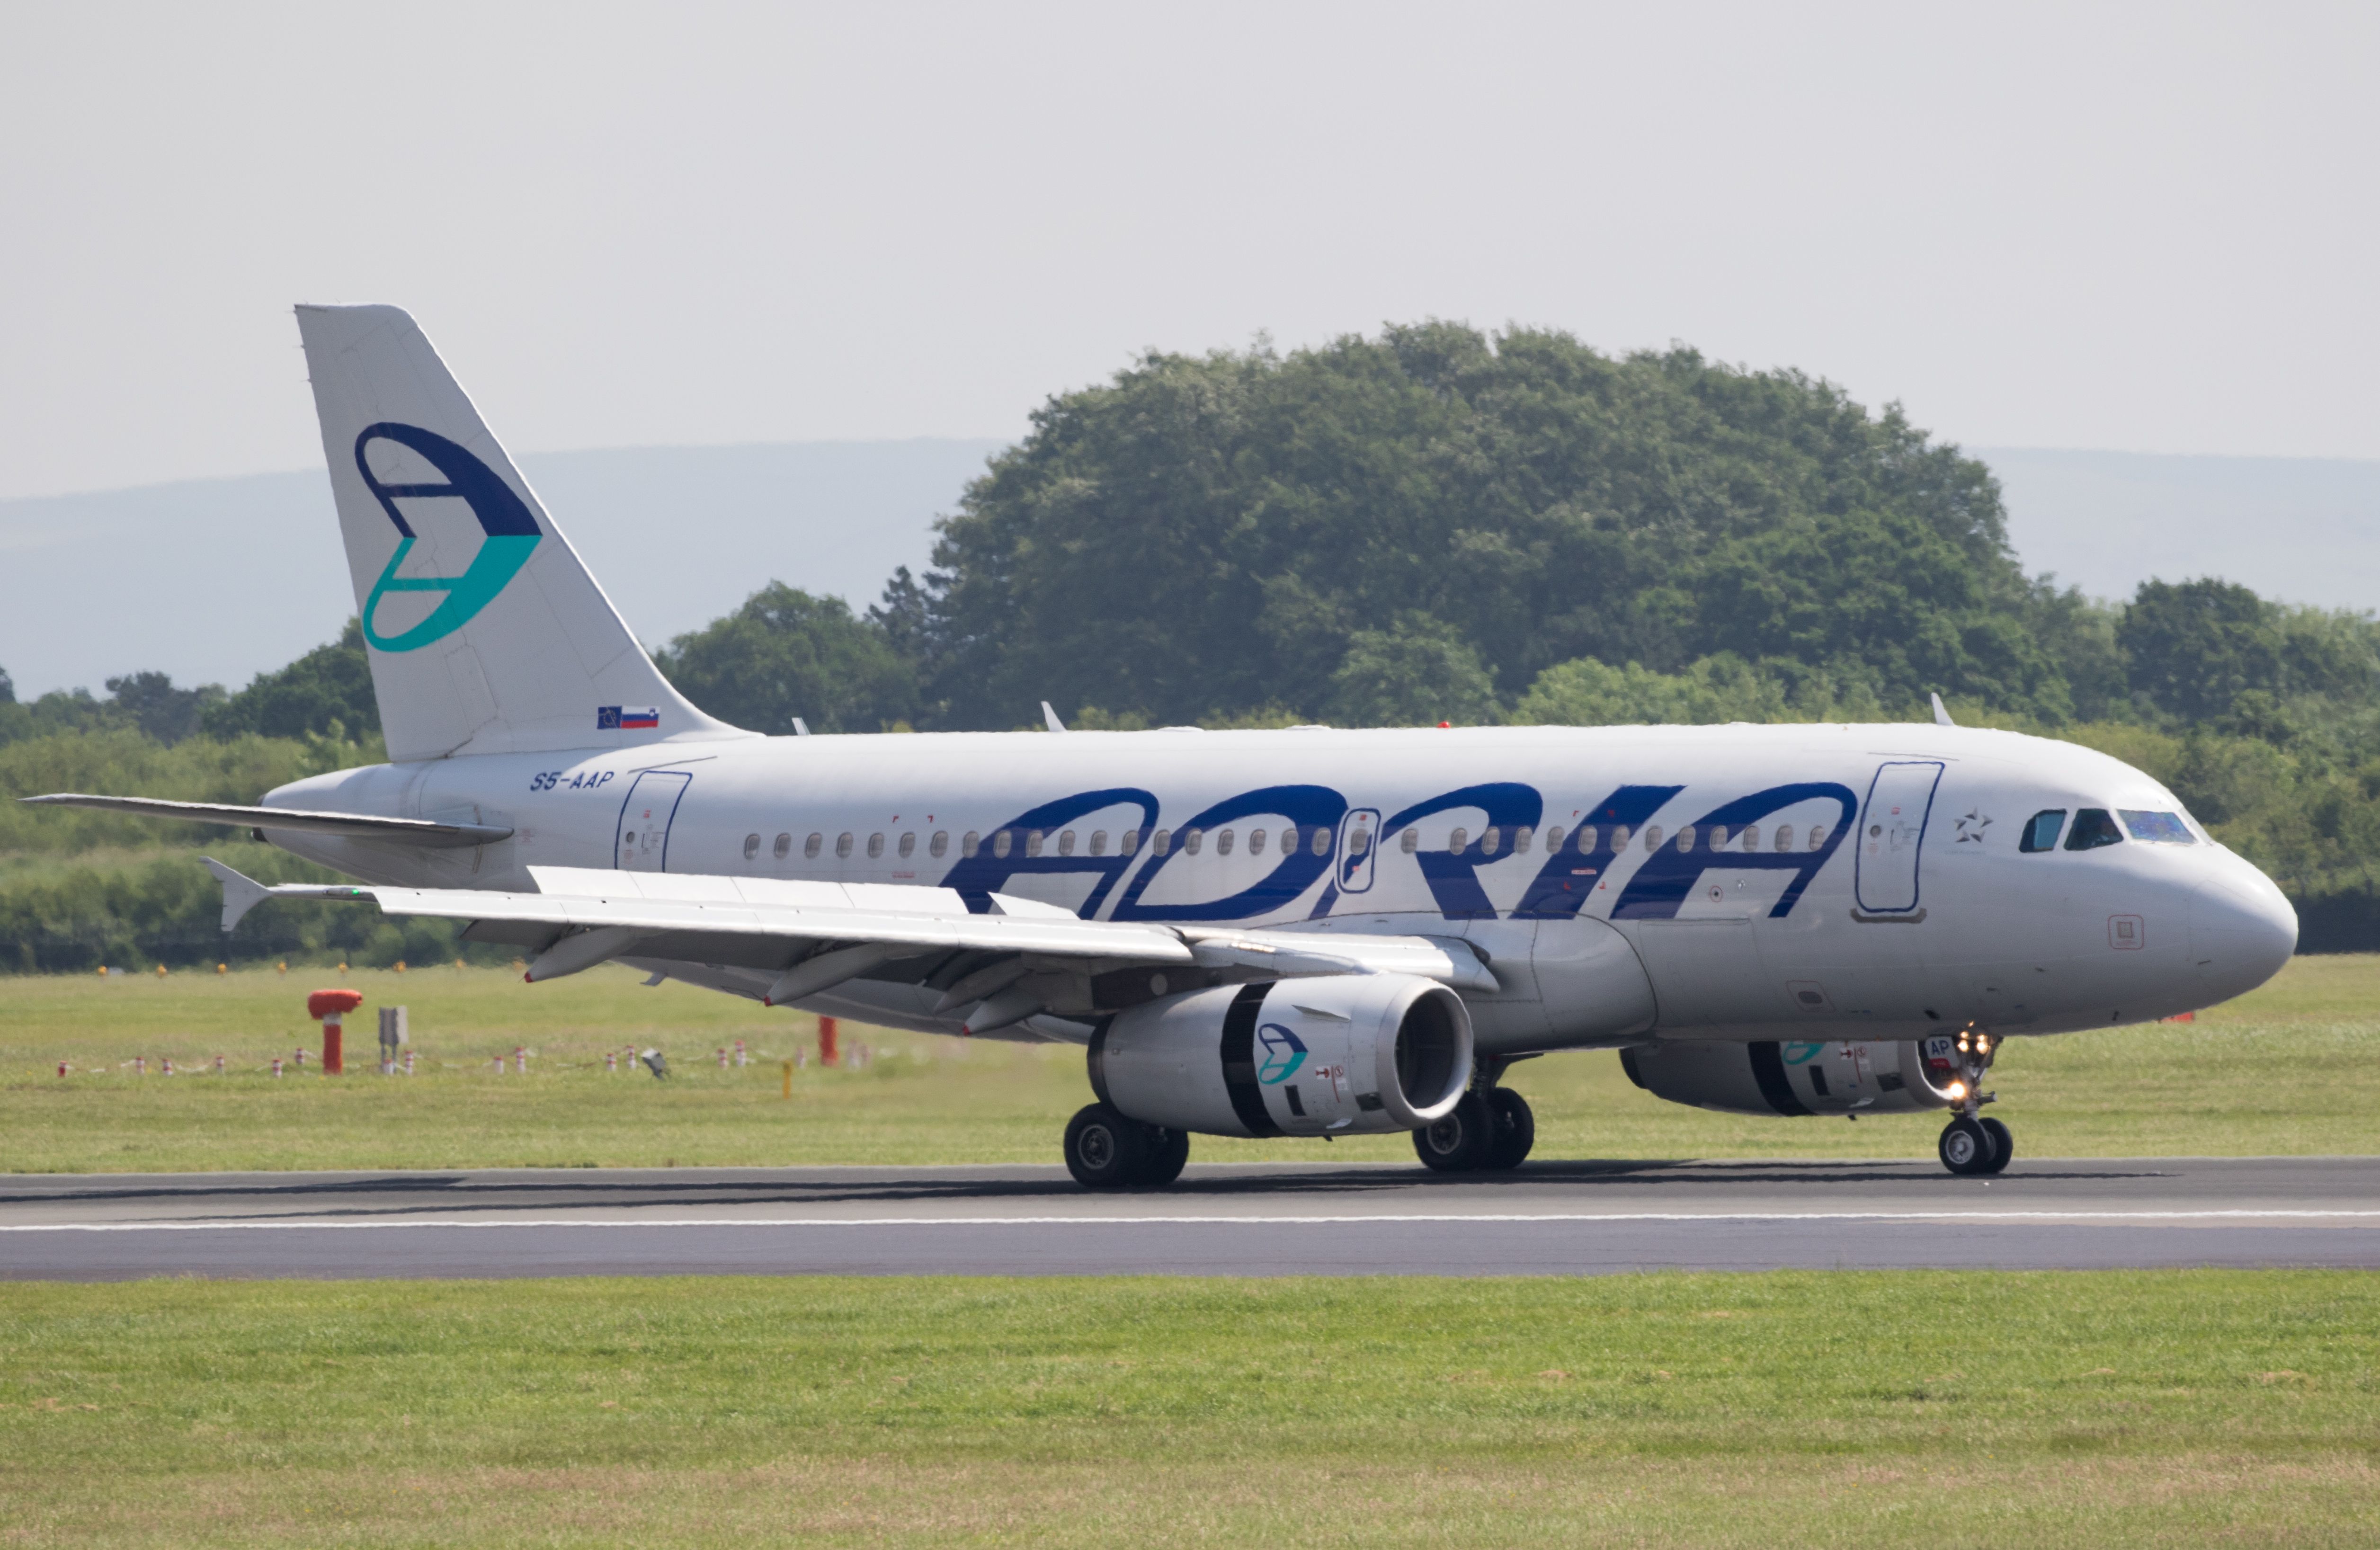 Adria Airways A319 at Manchester Airport June 2017